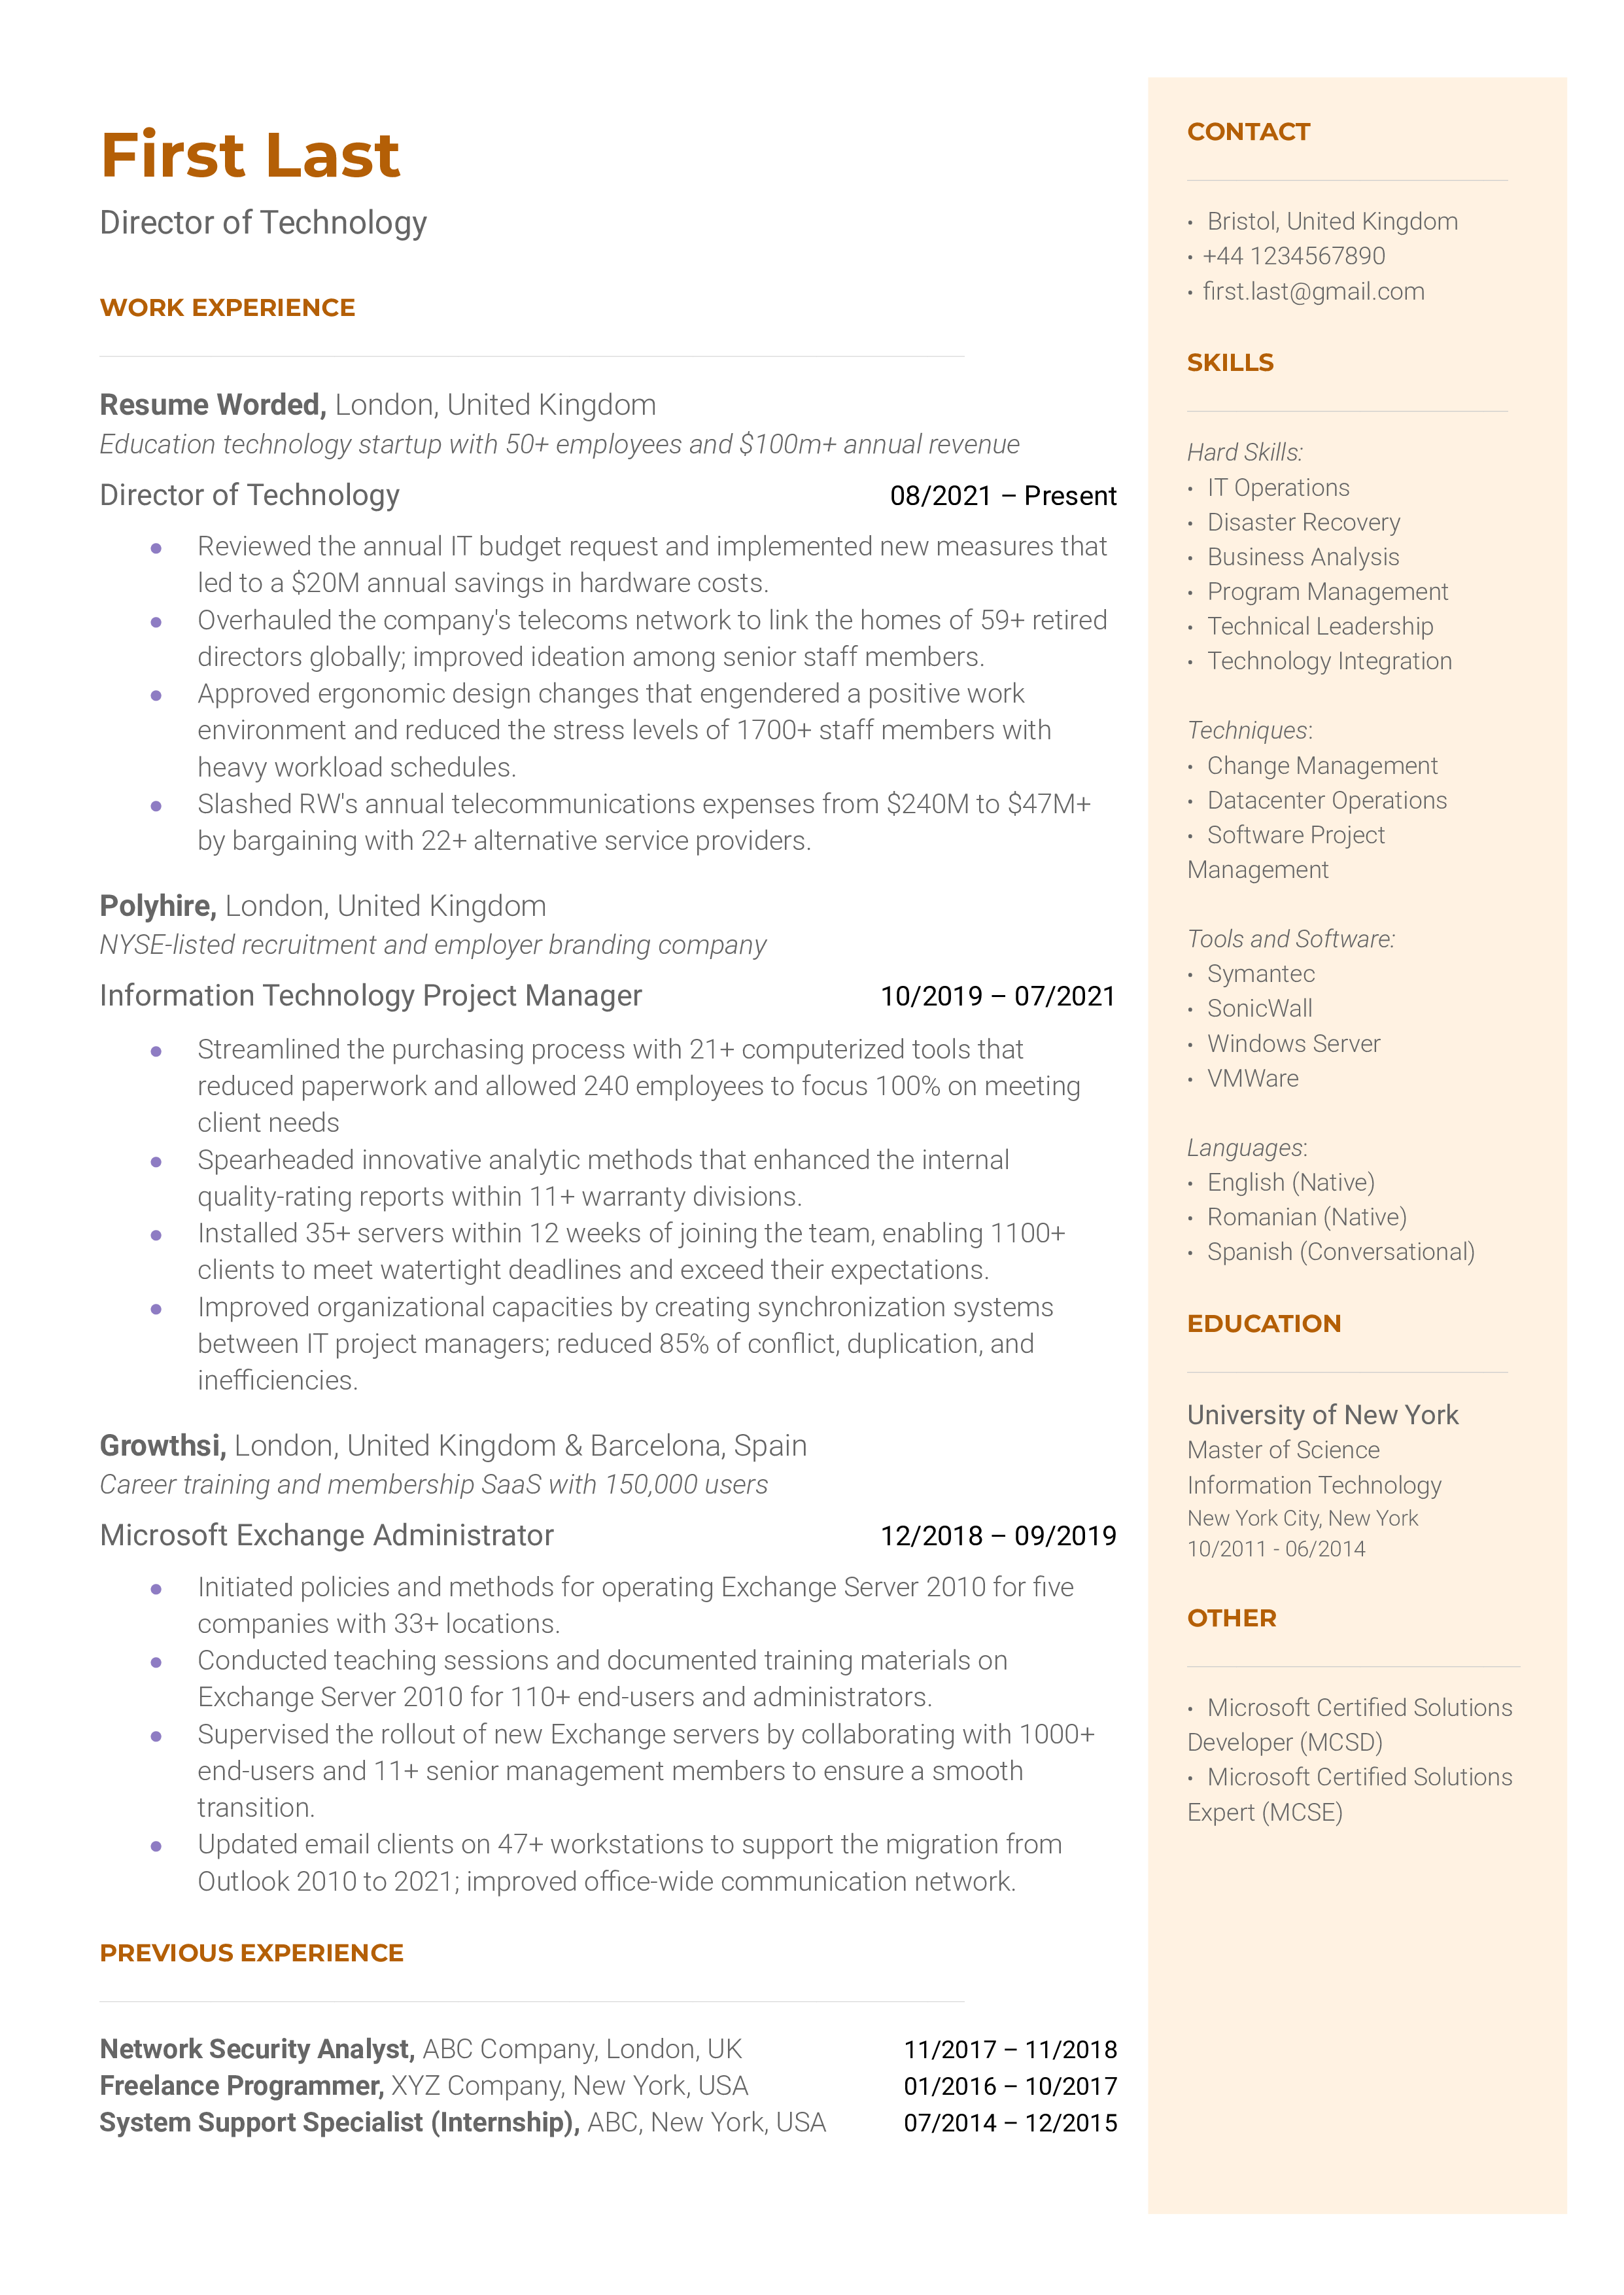 A director of technology resume template including relevant keywords